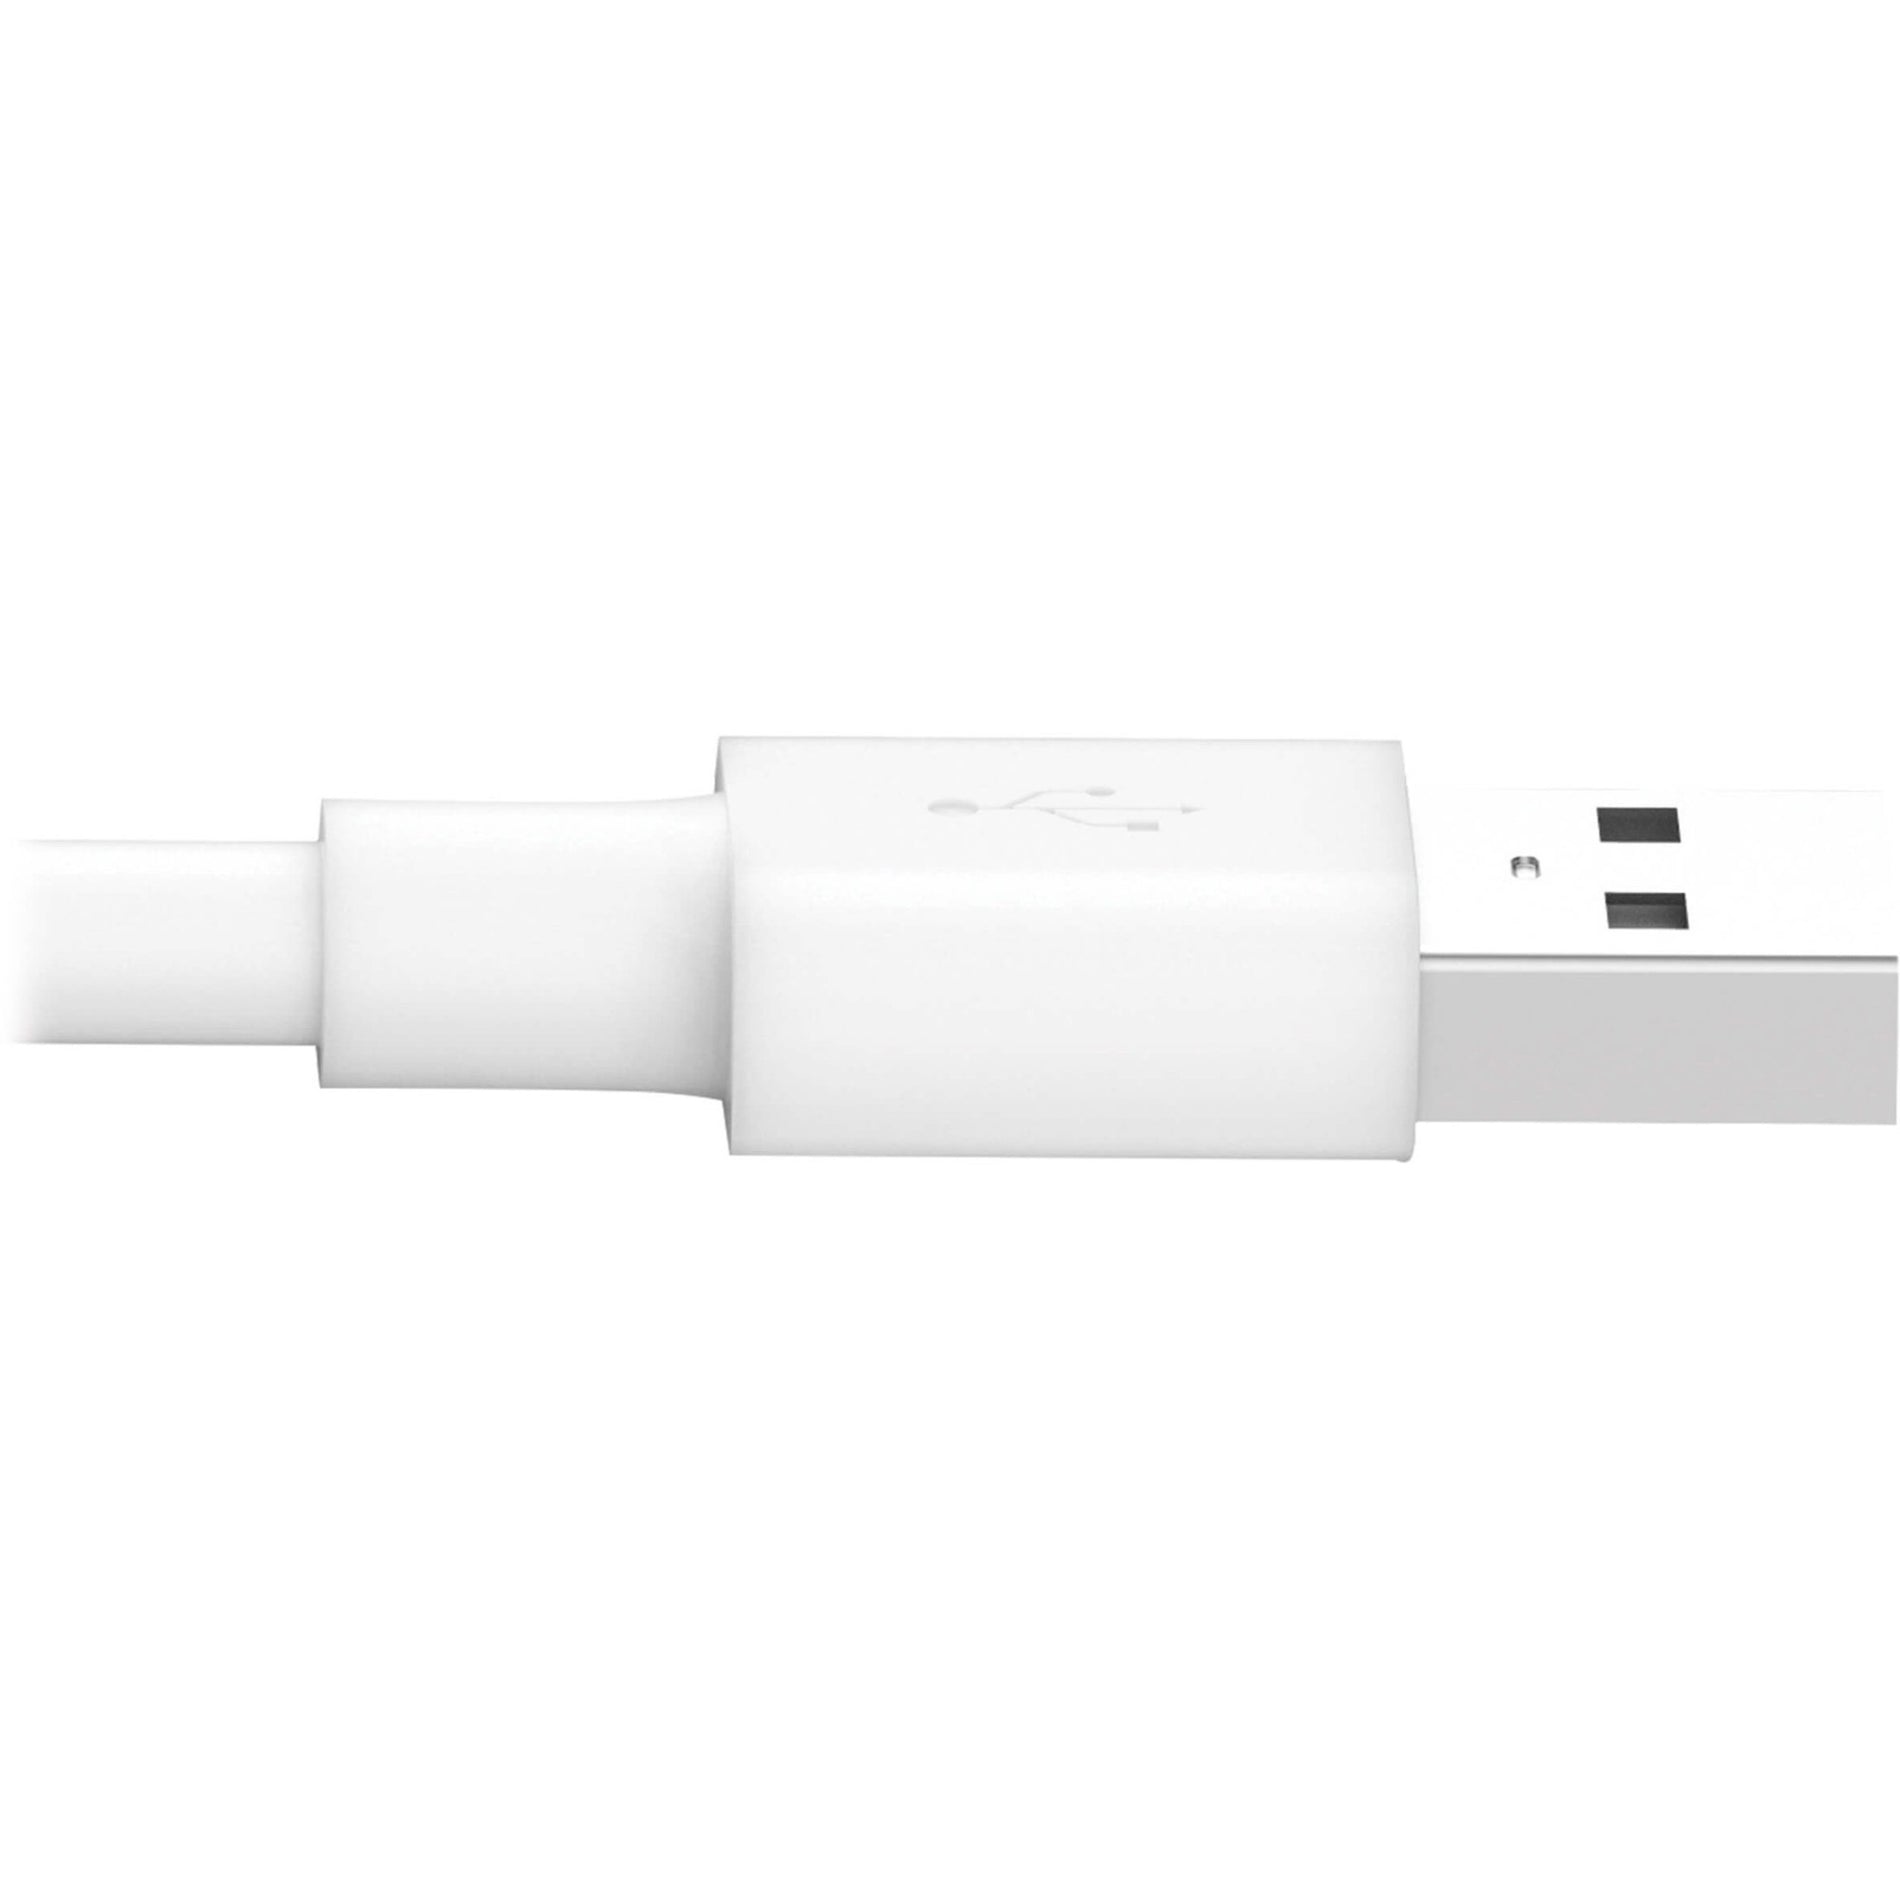 Tripp Lite M100-010-WH USB Sync/Charge Cable with Lightning Connector, White, 10 ft. (3 m)